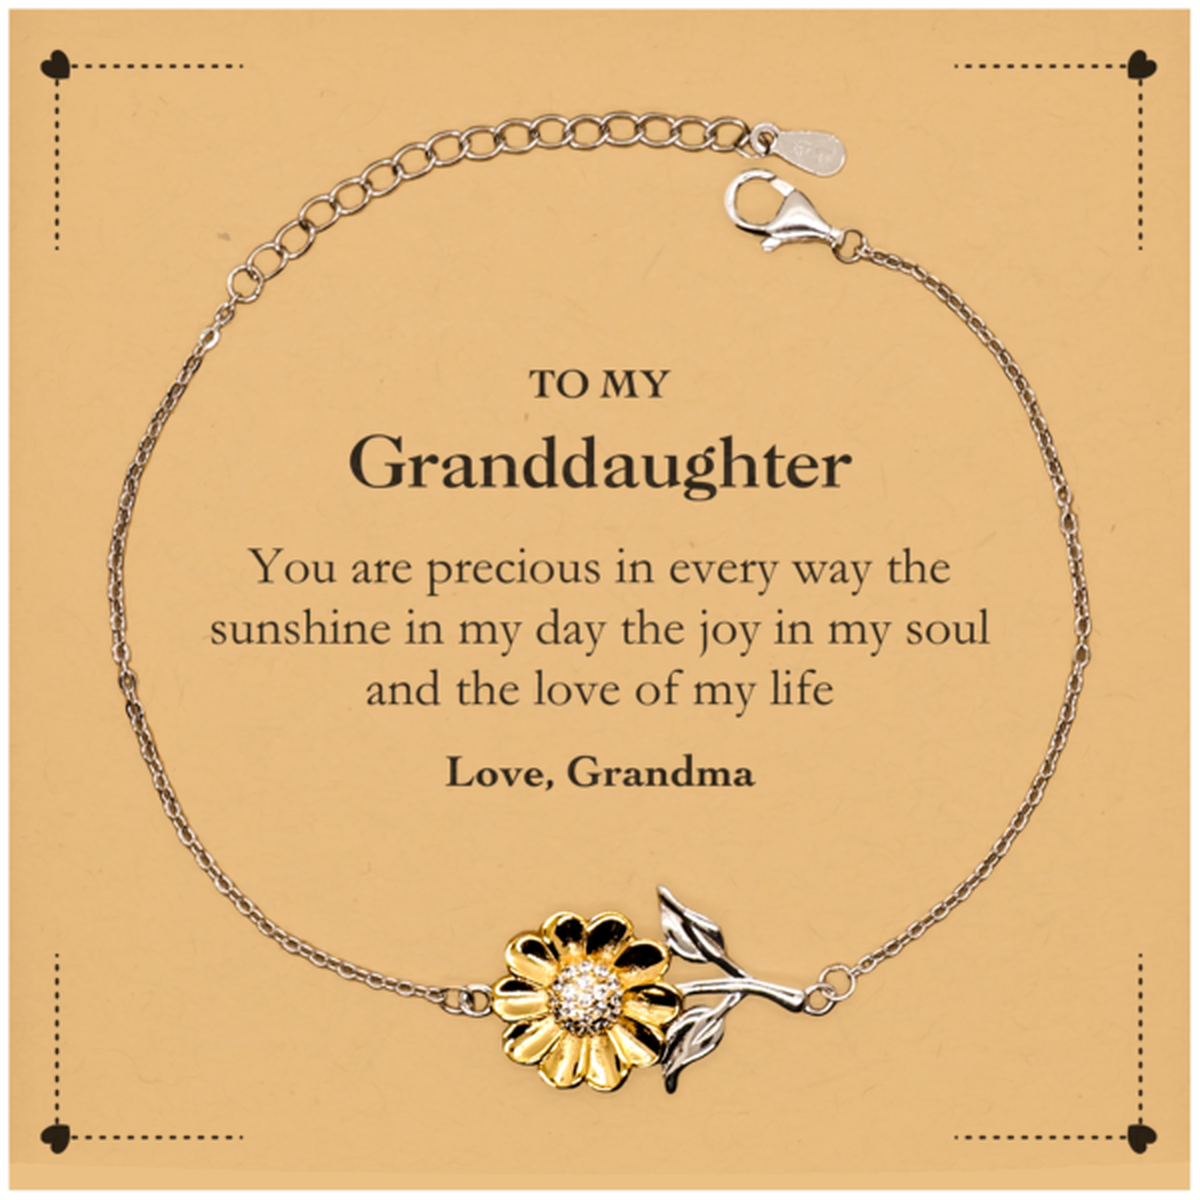 Graduation Gifts for Granddaughter Sunflower Bracelet Present from Grandma, Christmas Granddaughter Birthday Gifts Granddaughter You are precious in every way the sunshine in my day. Love, Grandma